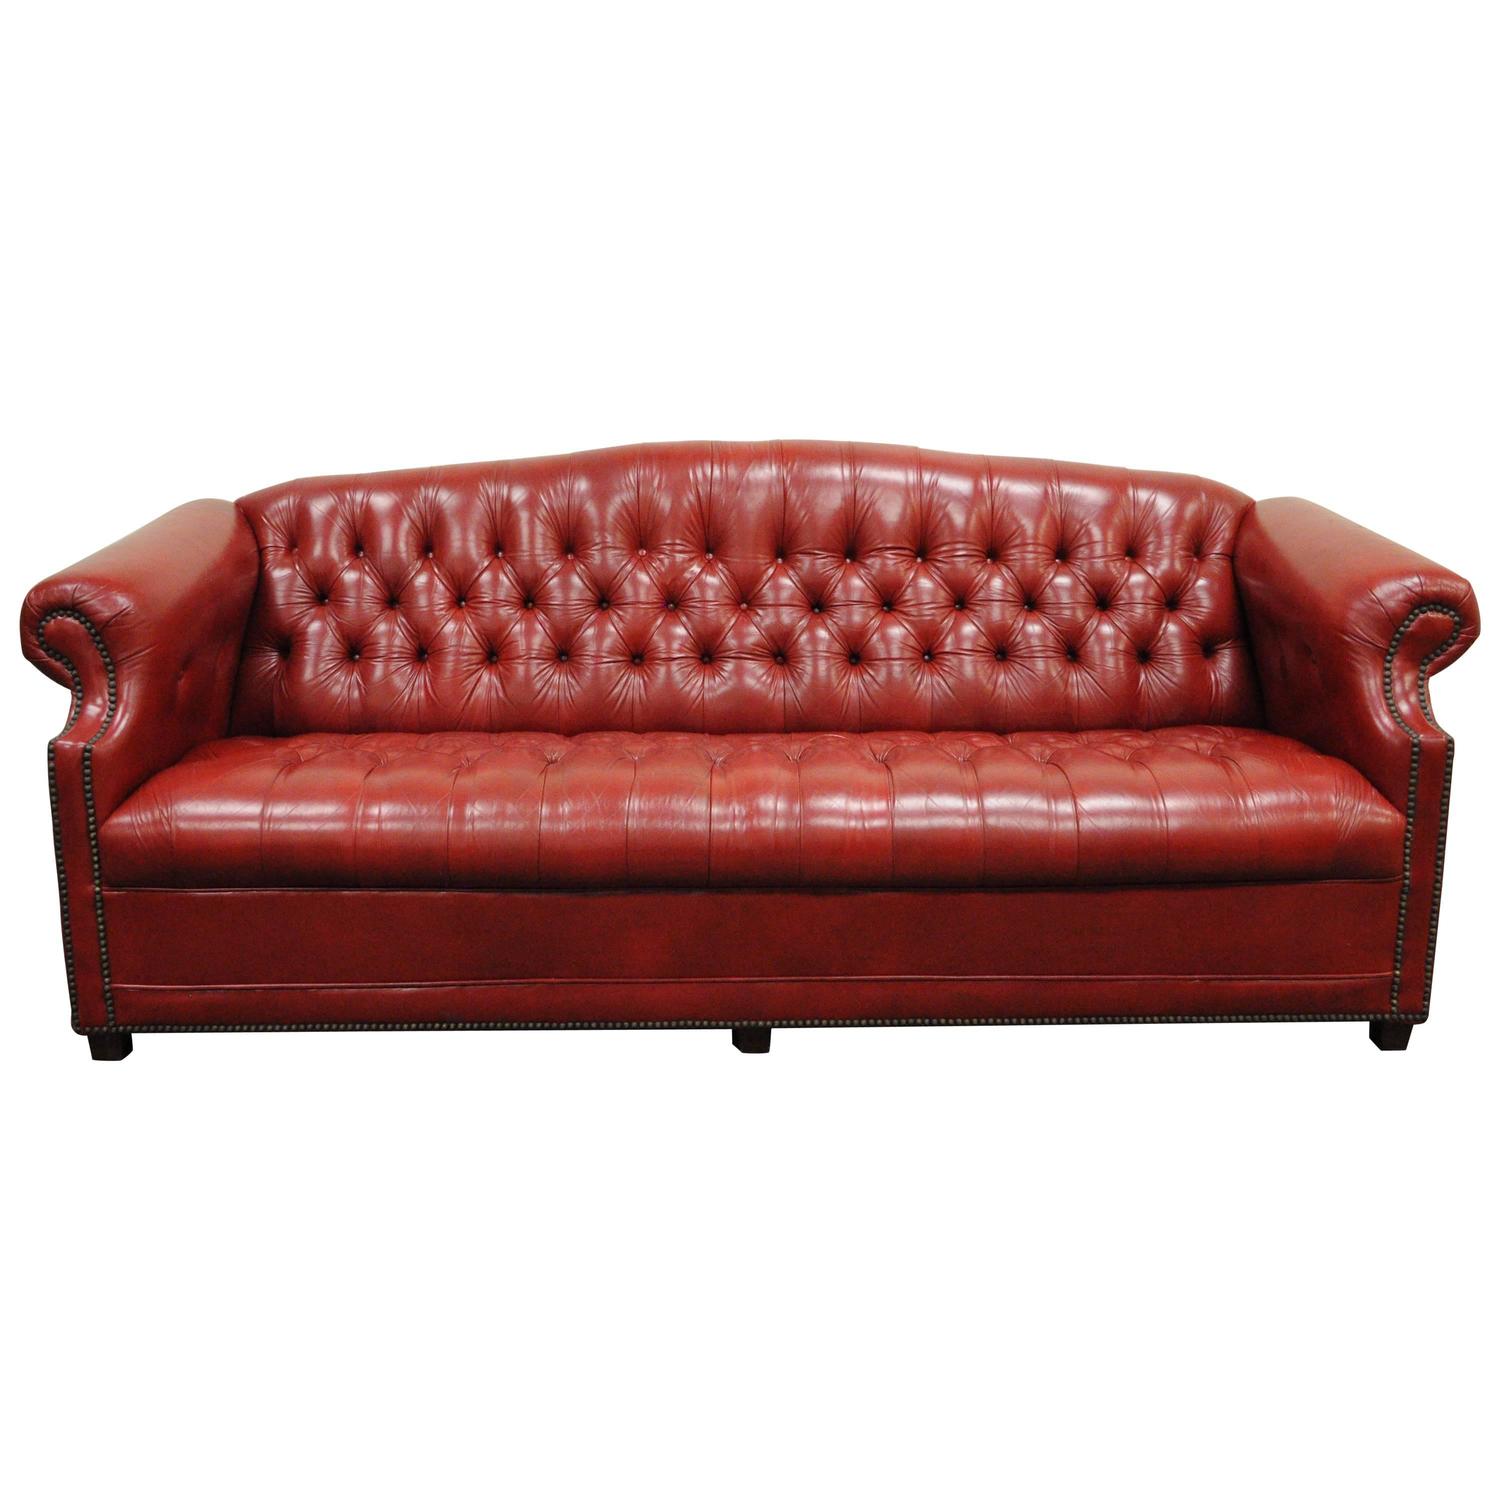 Vintage Red Leather English Chesterfield Style Button Tufted Sofa